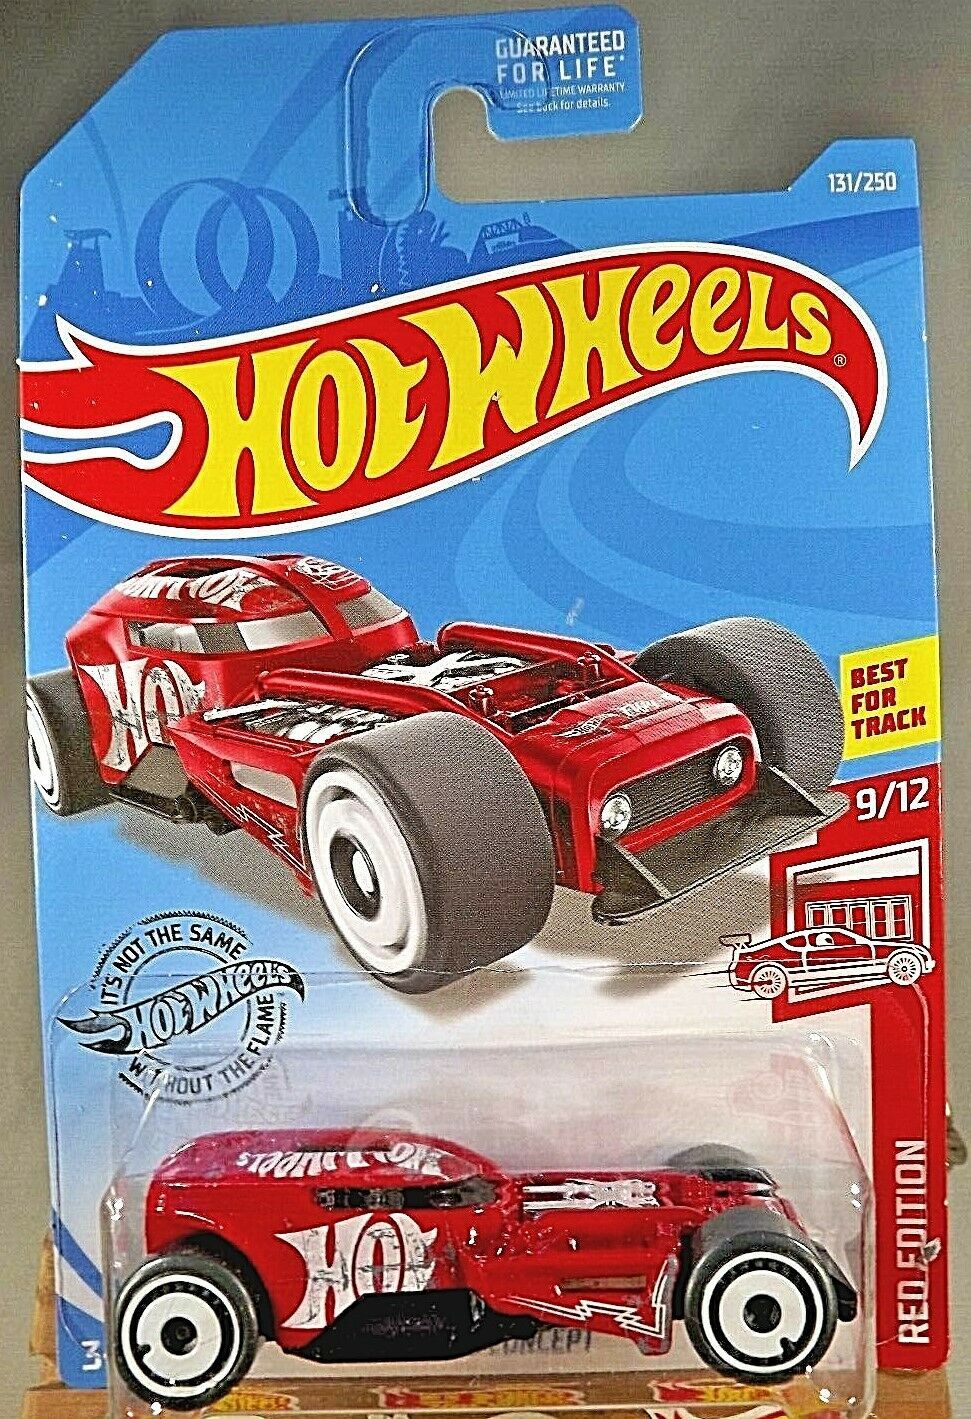 2019 Hot Wheels Target Exclusive 131 Red Edition 9/12 HW50 CONCEPT Red